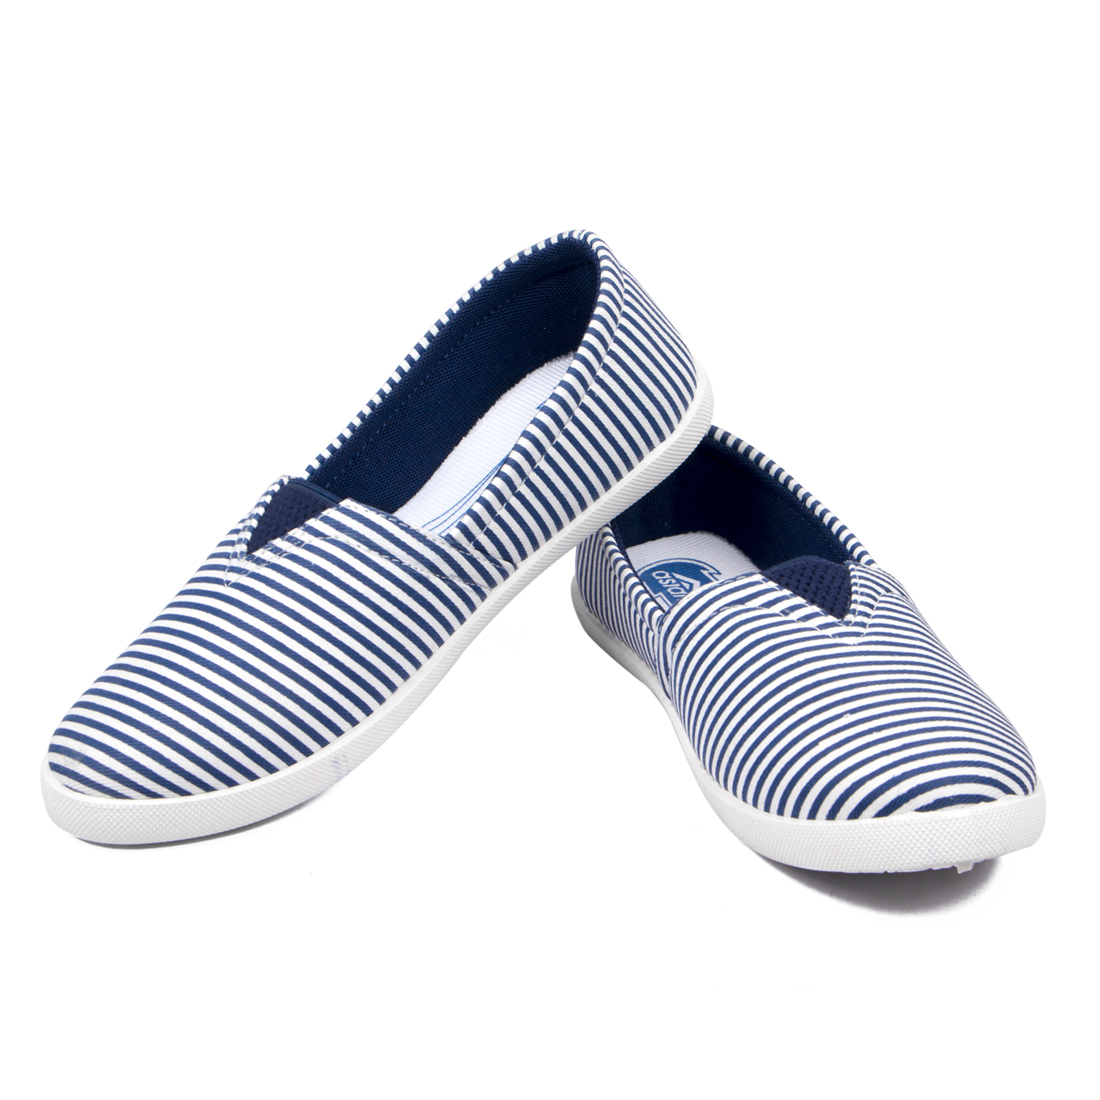 Buy Asian Women's Blue Smart Casuals Shoes Online @ ₹399 from ShopClues